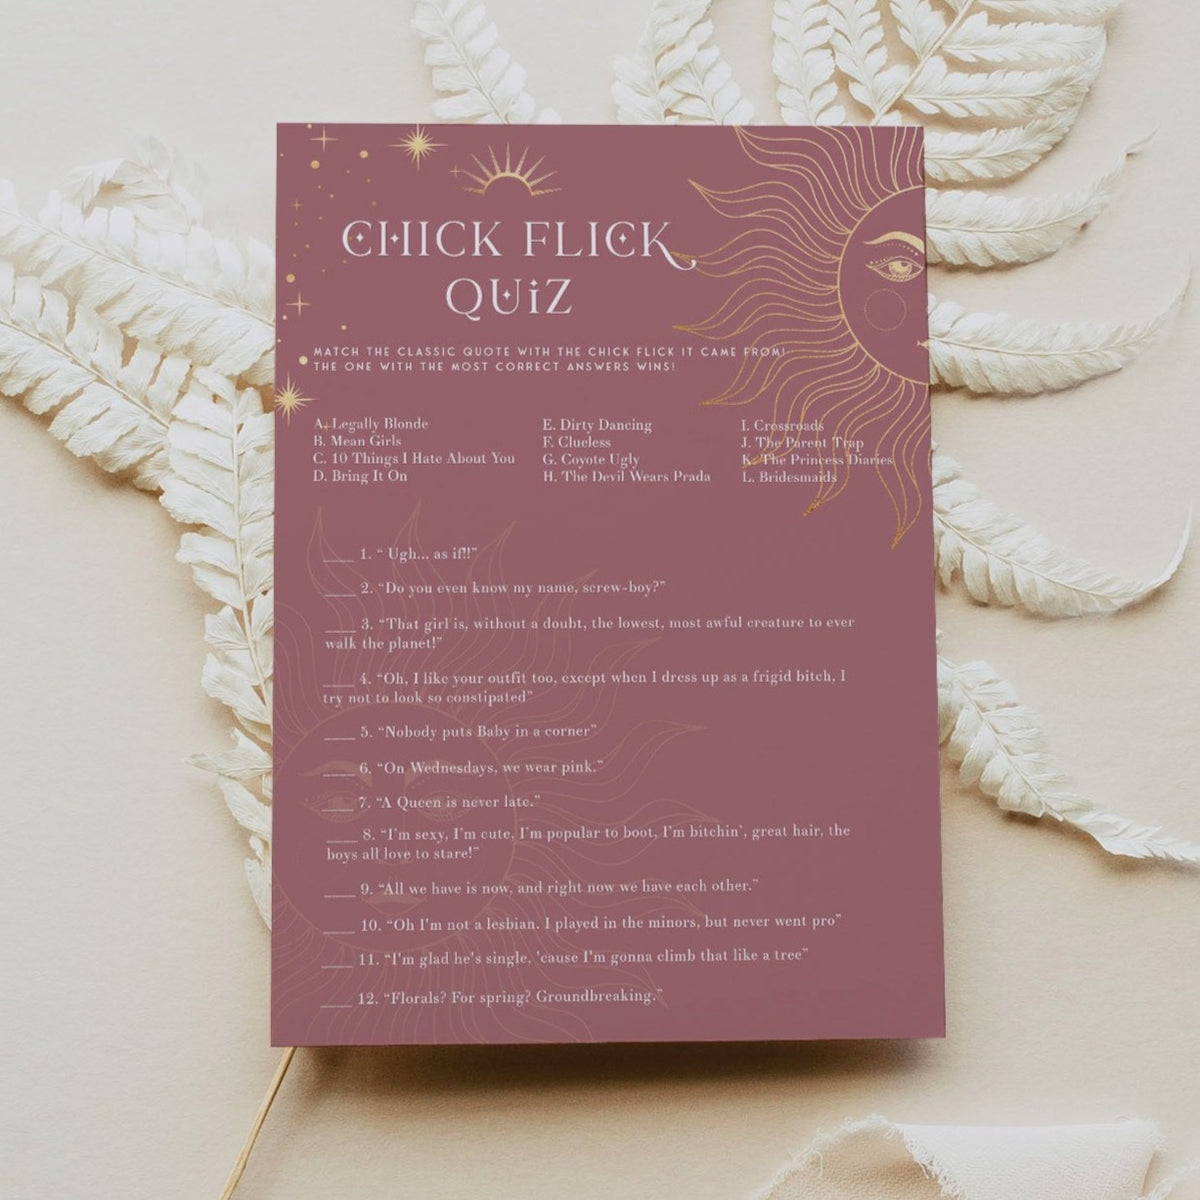 Fully editable and printable bridal shower chick flick quiz game with a celestial design. Perfect for a celestial bridal shower themed party